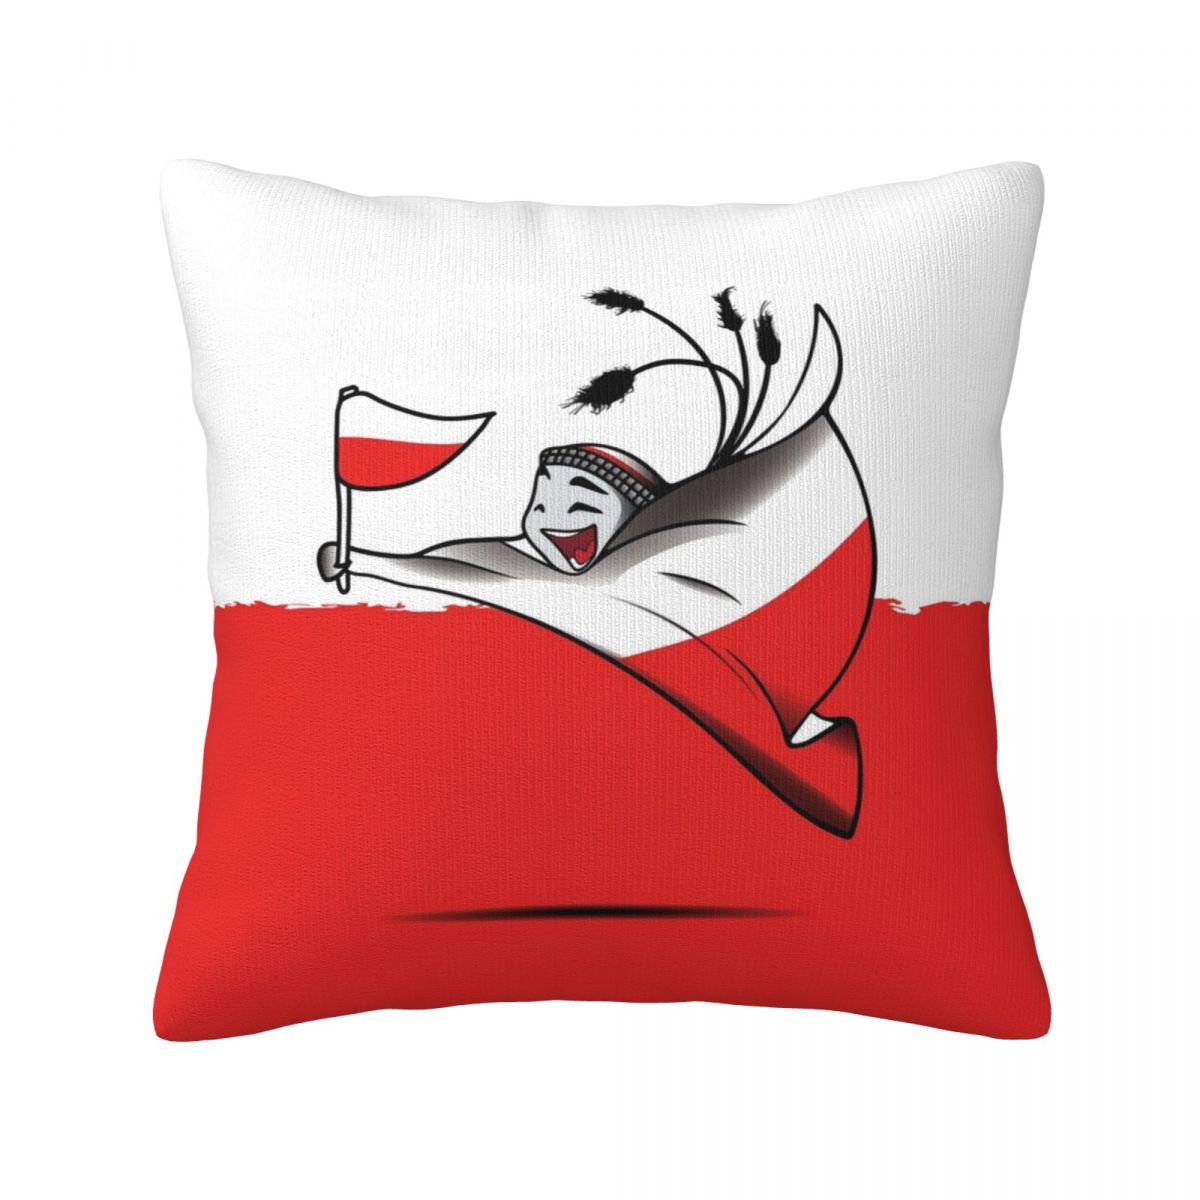 Poland World Cup 2022 Mascot Decorative Square Throw Pillow Covers